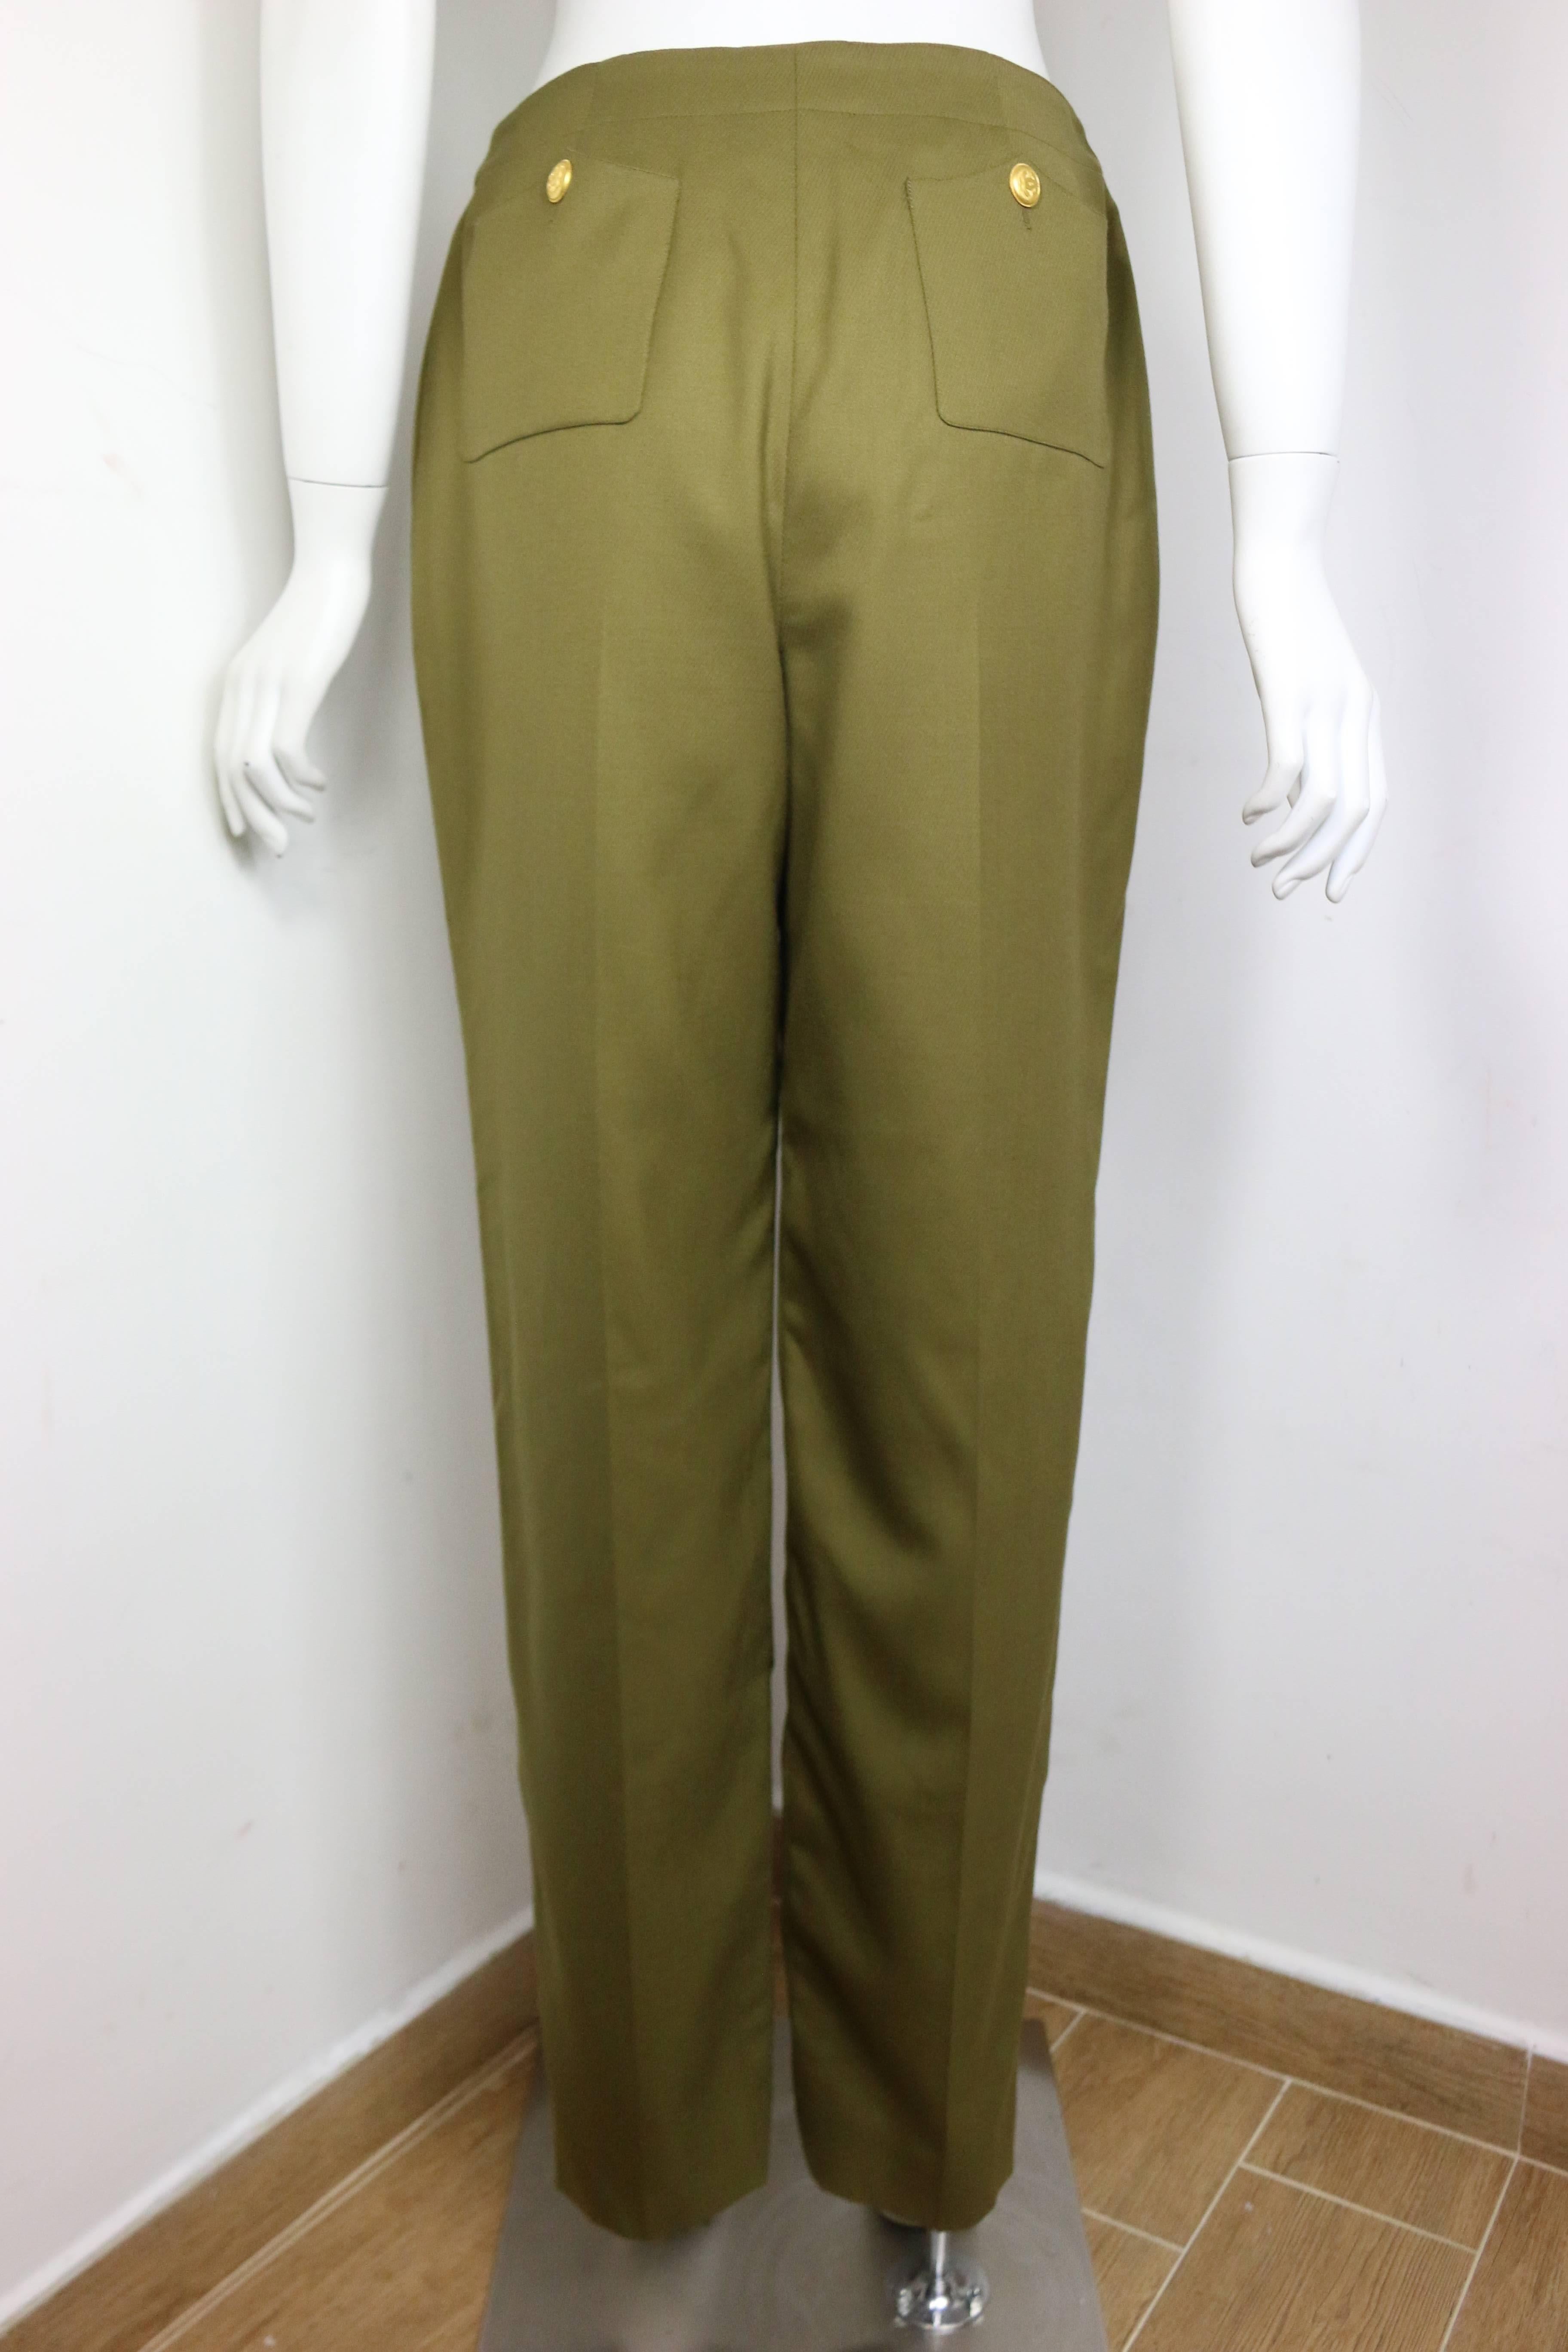 - Vintage Chanel army green wool military style straight leg pants from 1996 A/W collection. Featuring a gold toned 